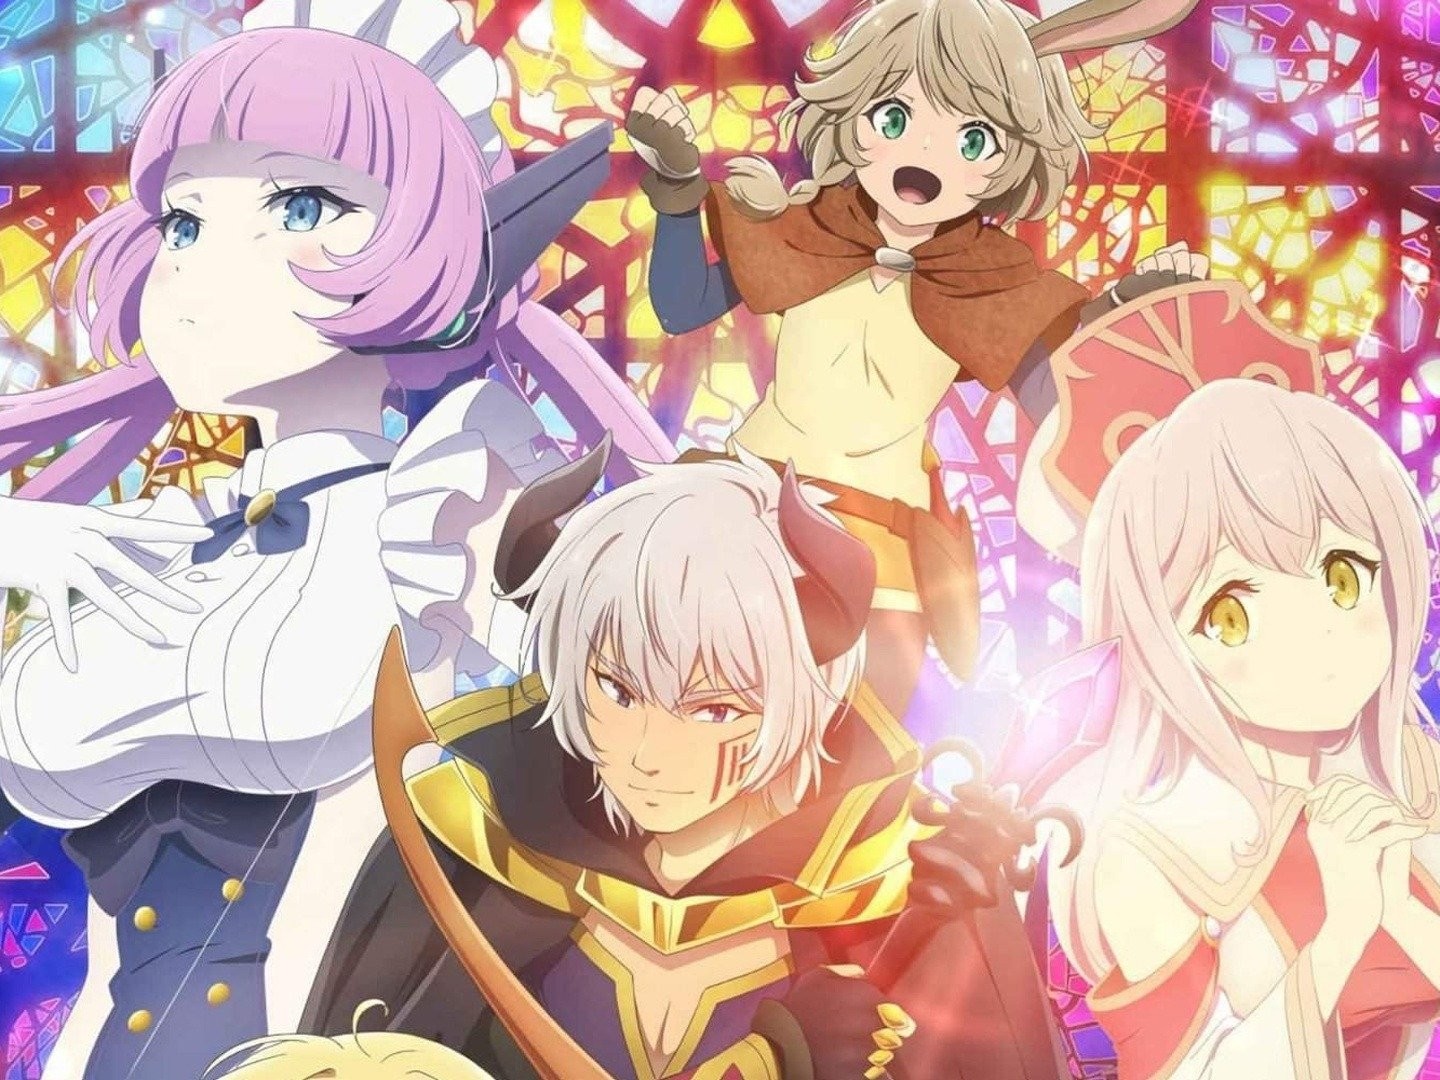  Review for How NOT to Summon a Demon Lord - Season 2